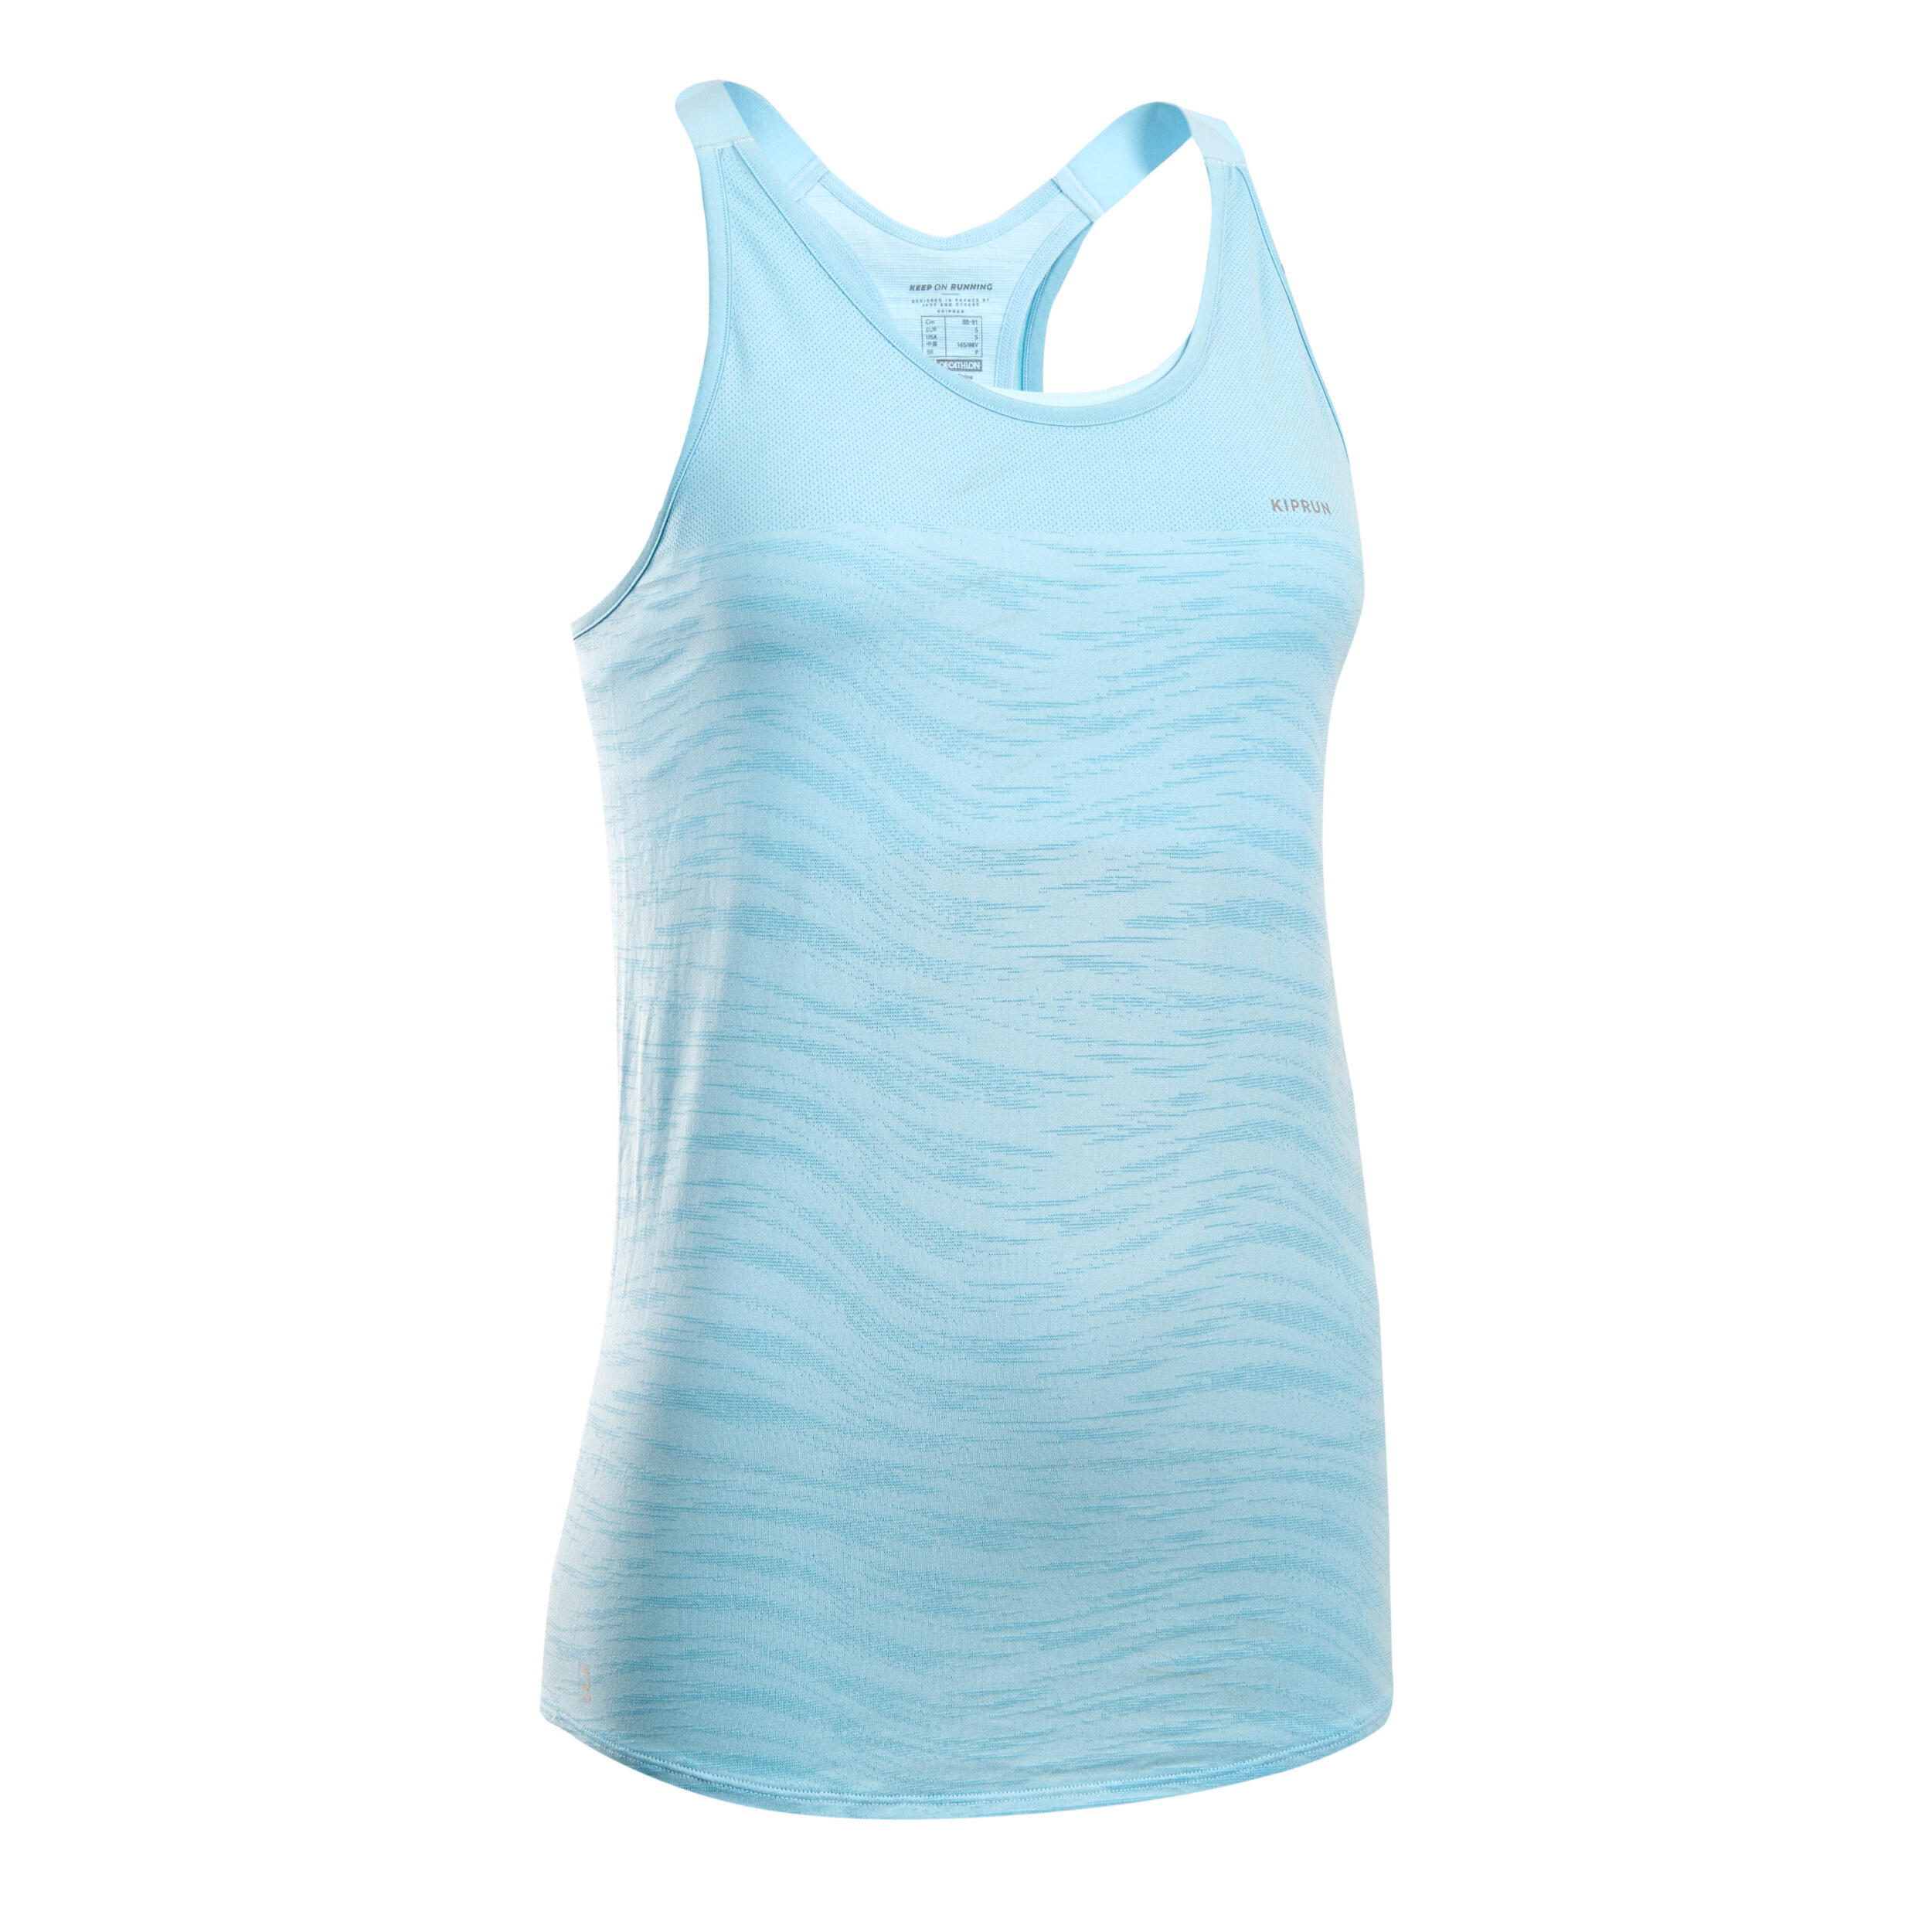 Refurbished Womens Running Tank Top with Built-in Bra - A Grade 1/7